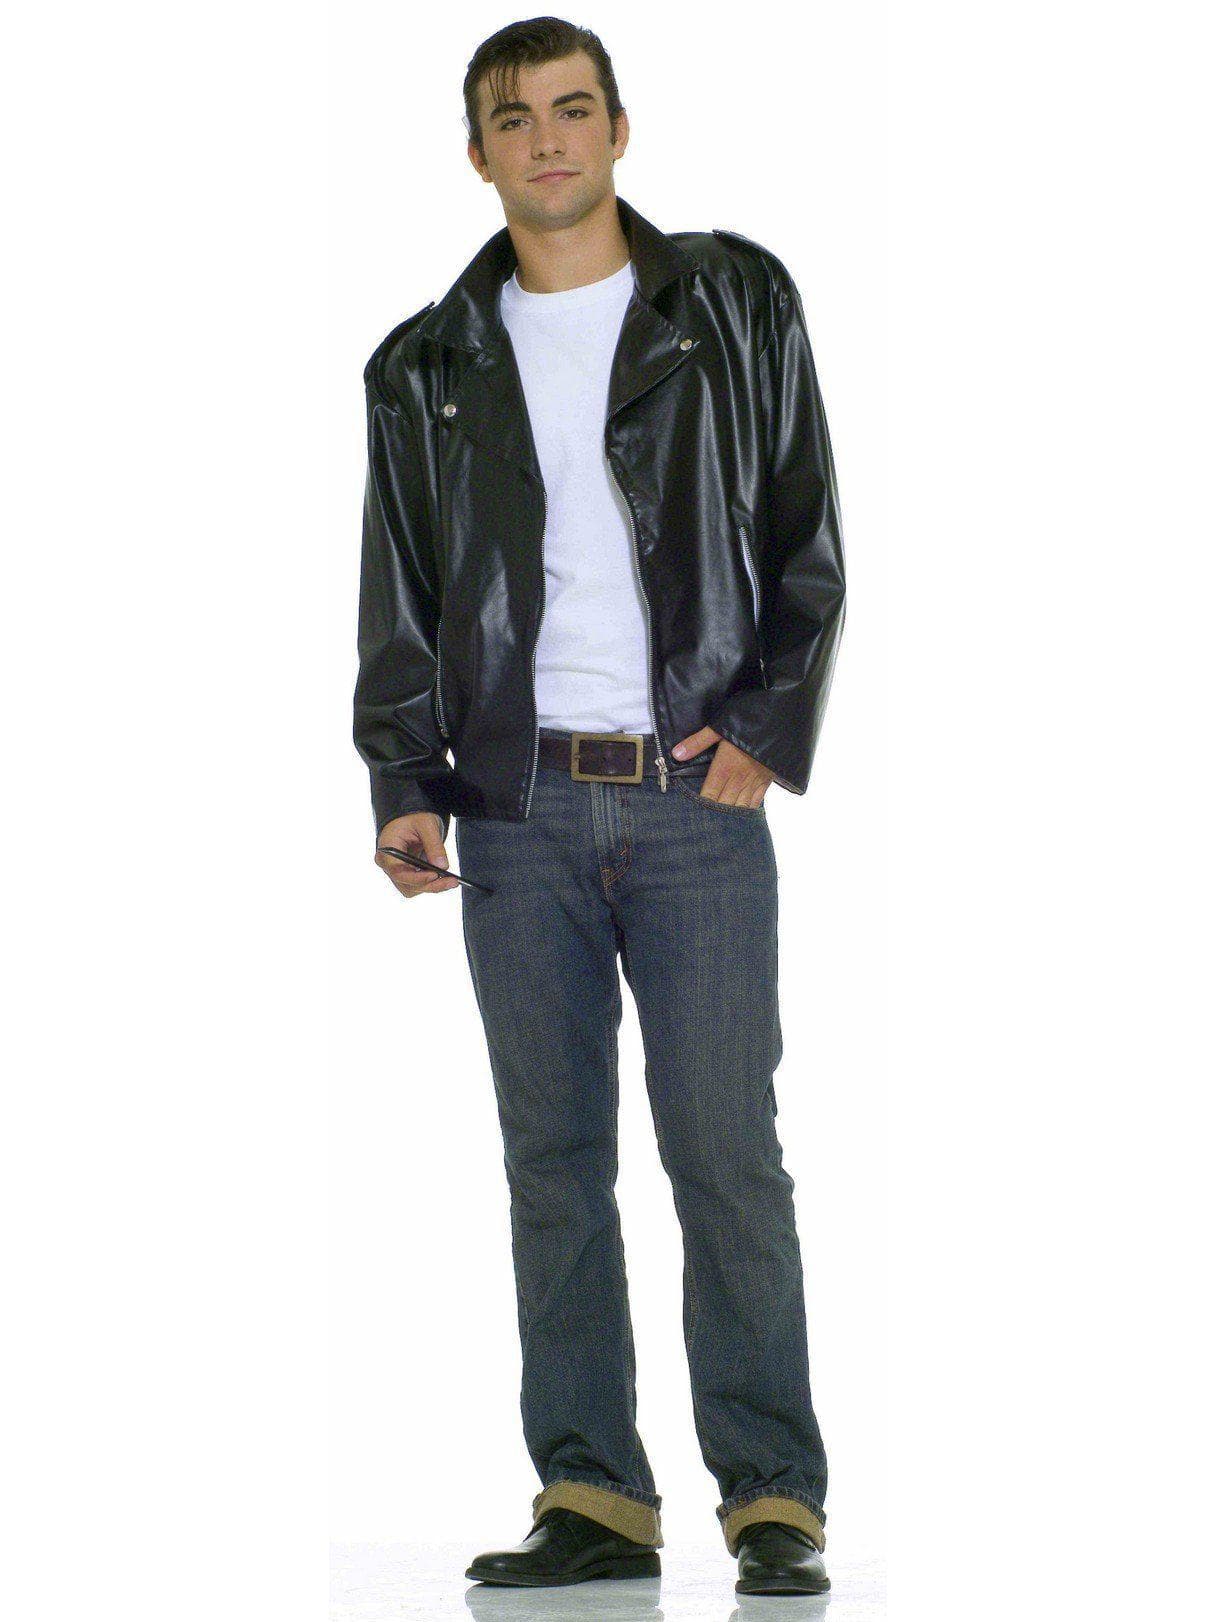 Adult Greaser Jacket Size Costume - costumes.com